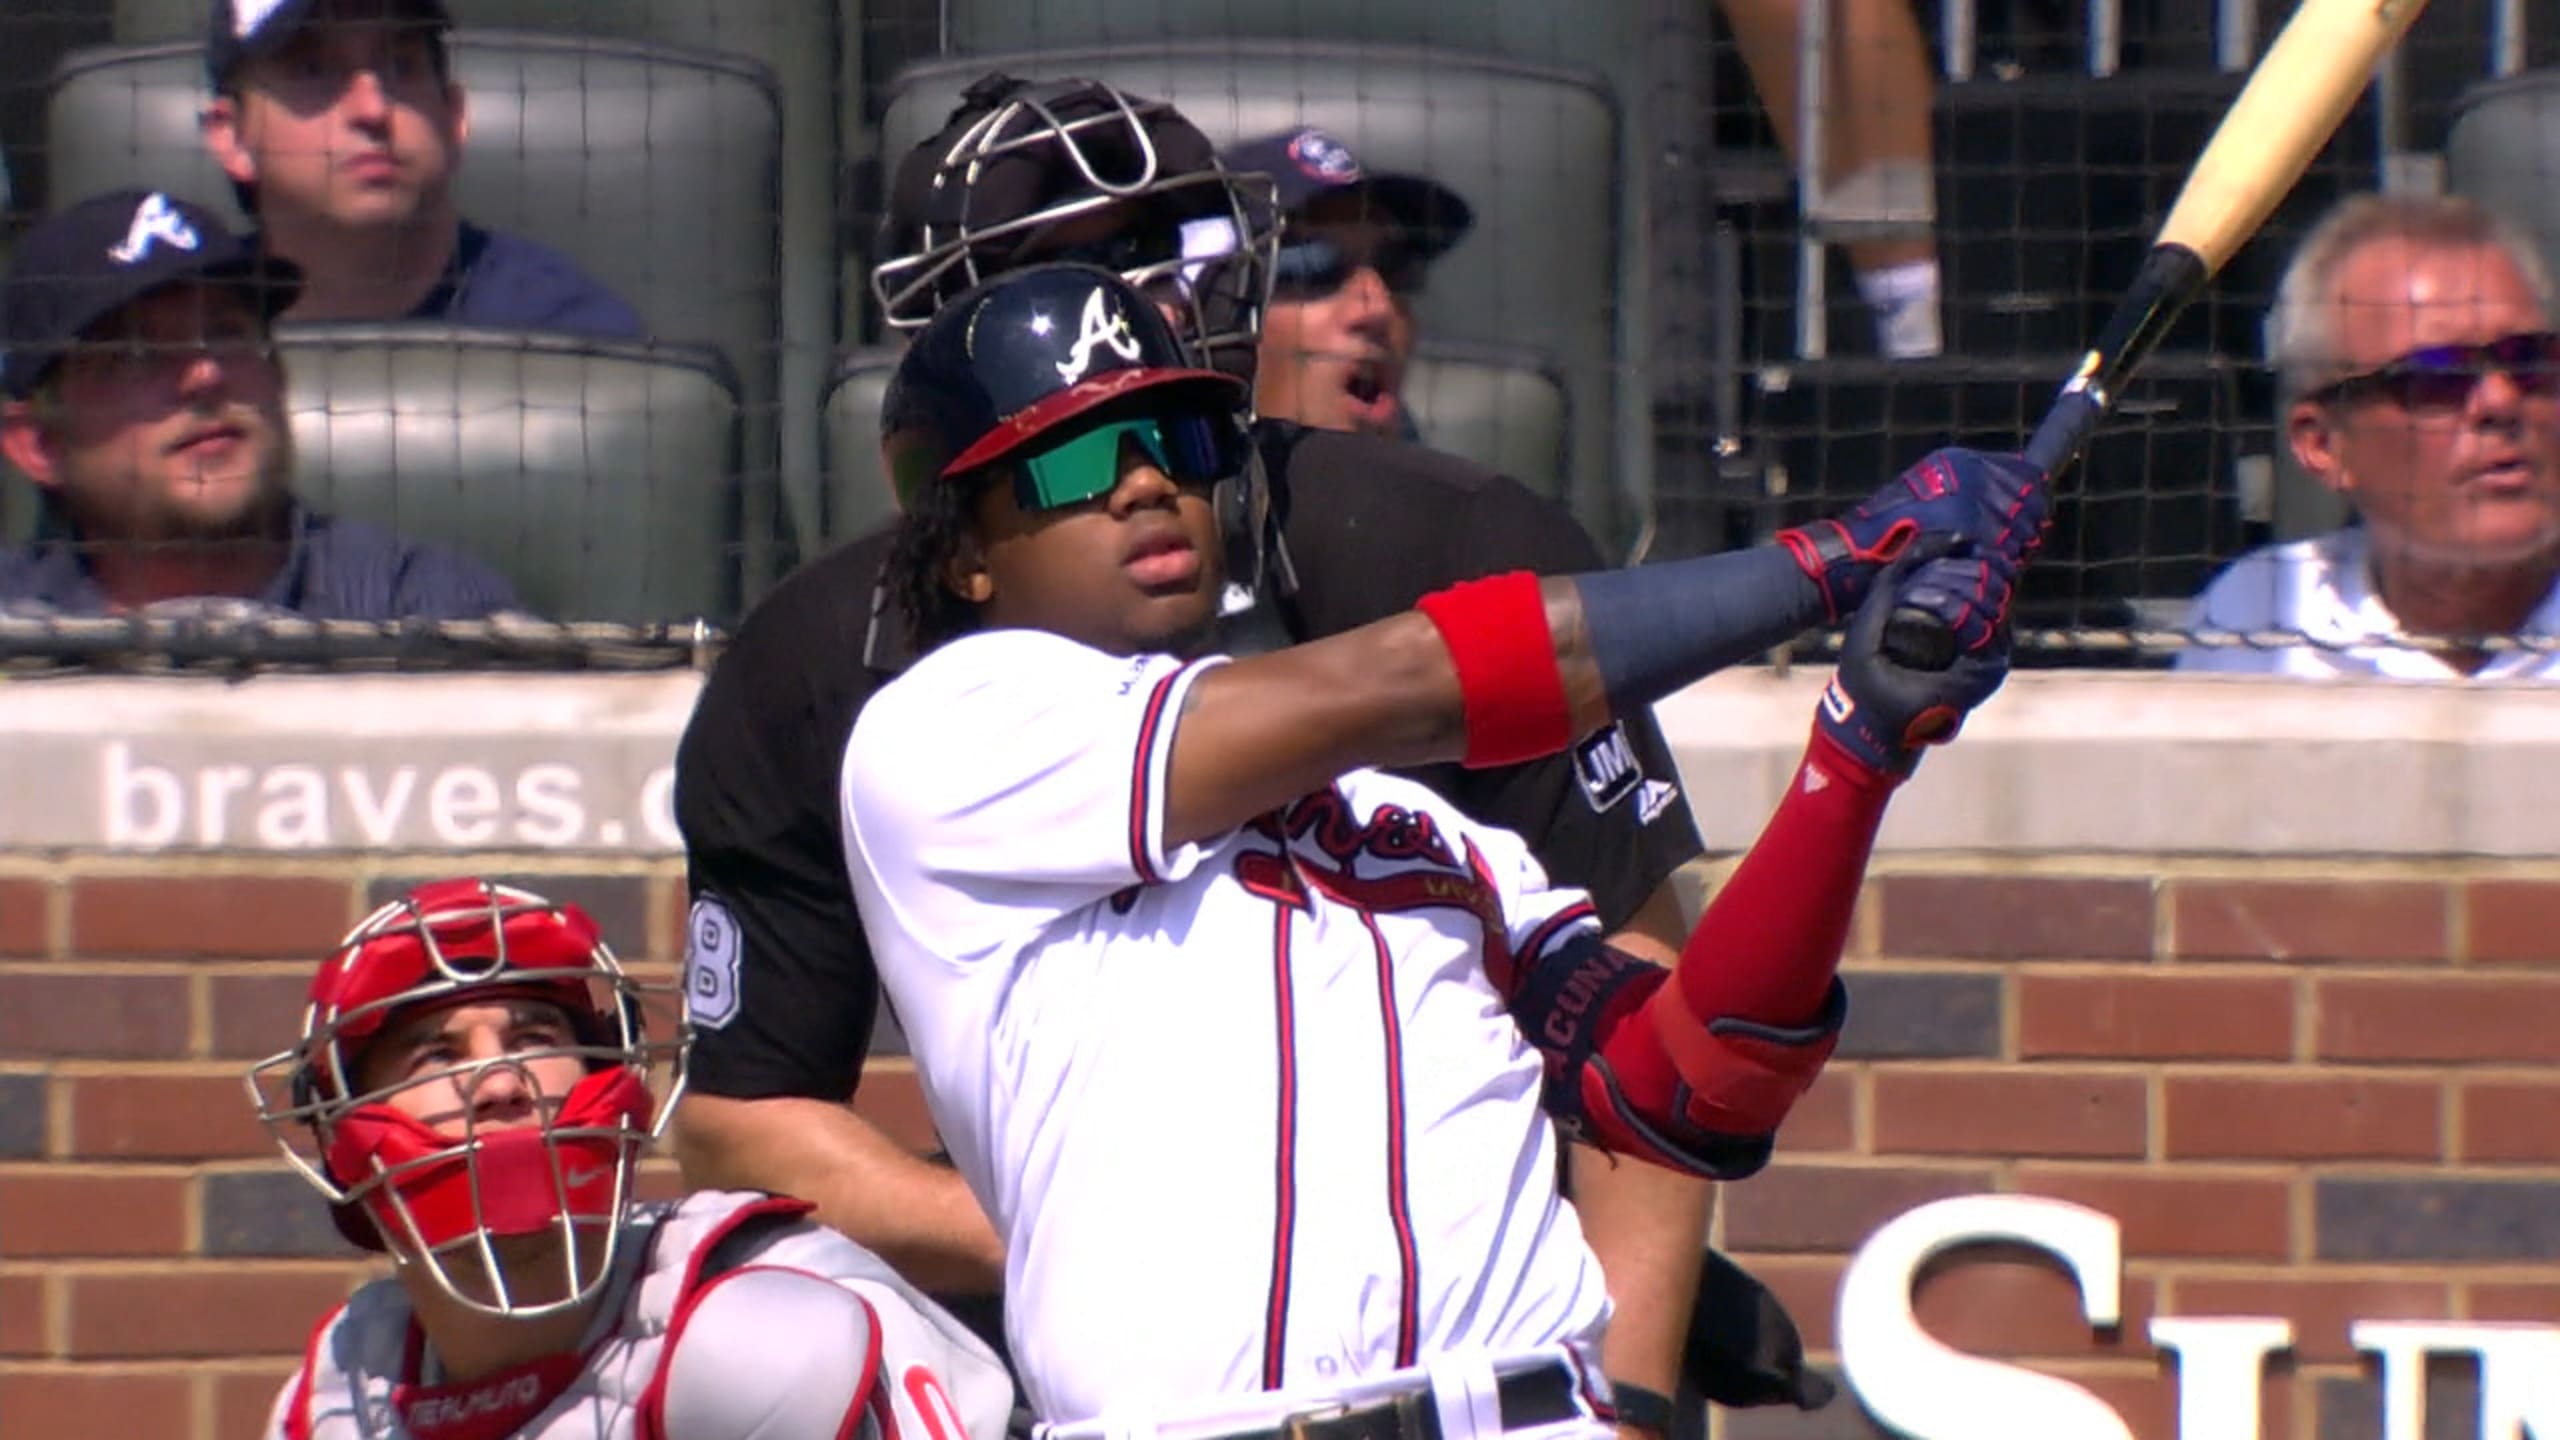 Braves' Ronald Acuna Jr. 40-70 video tribute during 10th inning